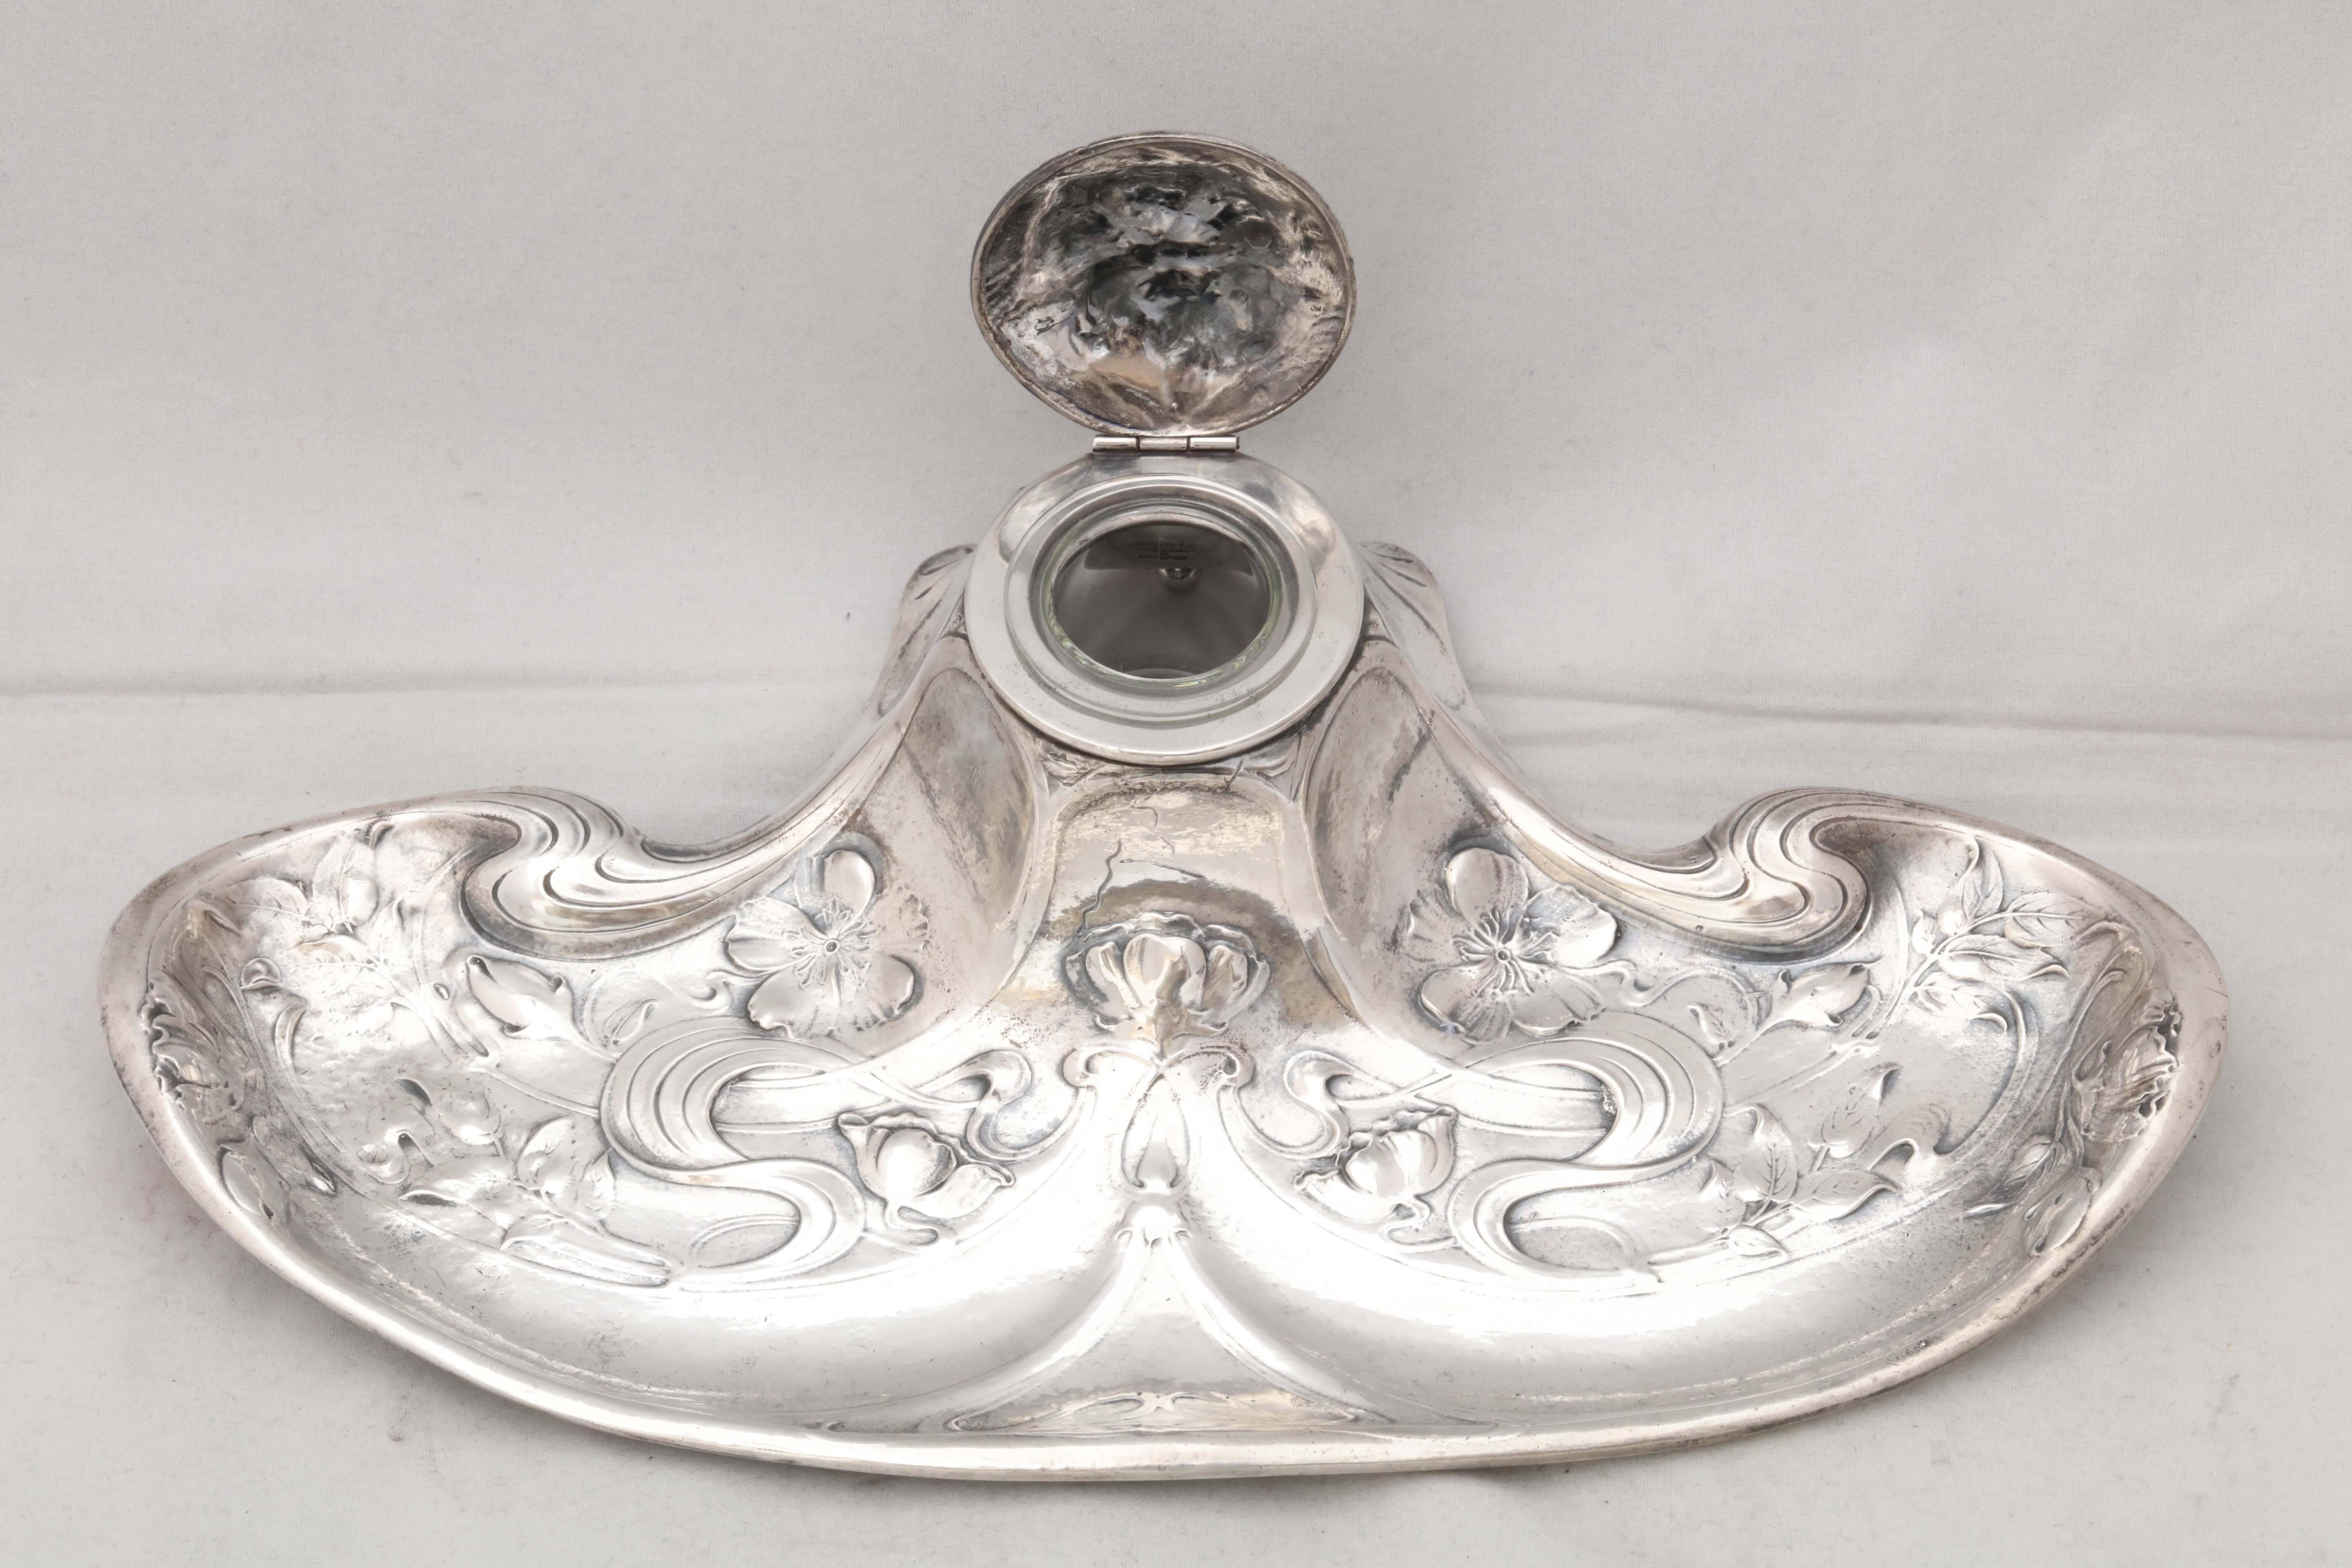 Hammered Rare Sterling Silver Art Nouveau Gorham Martele Footed Inkstand with Hinged Lid For Sale